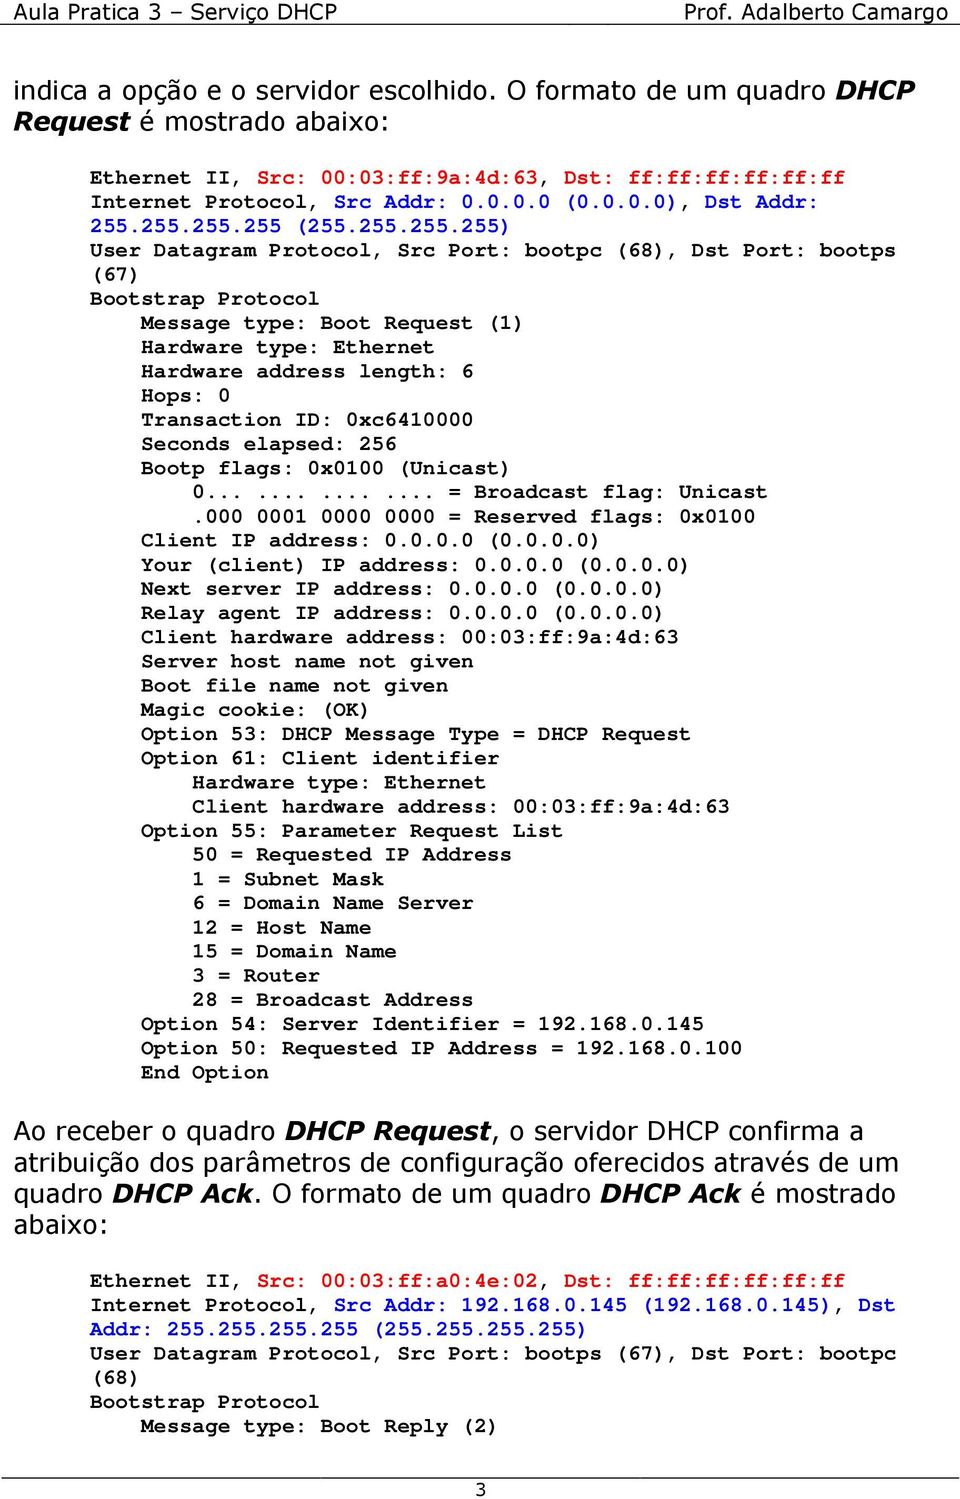 000 0001 0000 0000 = Reserved flags: 0x0100 Your (client) IP address: 0.0.0.0 (0.0.0.0) Option 53: DHCP Message Type = DHCP Request Option 61: Client identifier Option 55: Parameter Request List 50 =